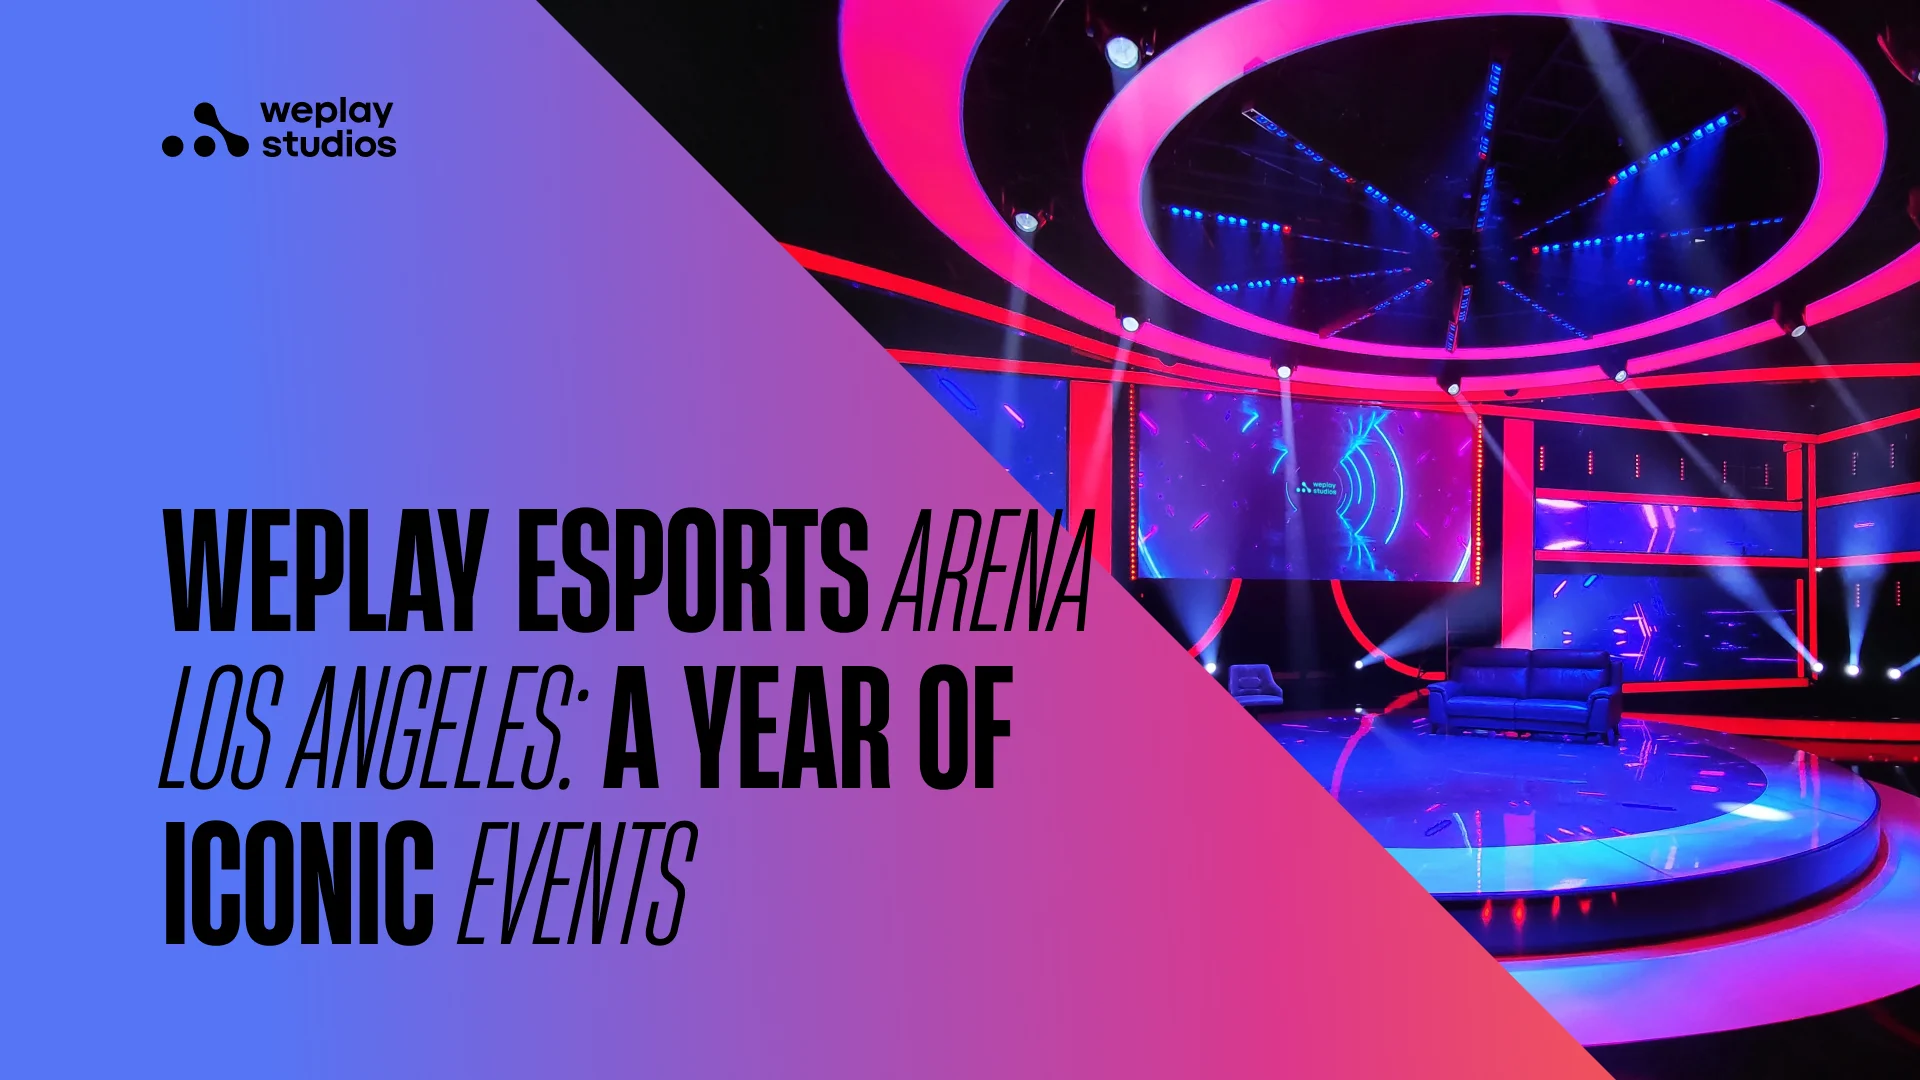 WePlay Esports Arena Los Angeles: a year of iconic events. Visual: WePlay Studios